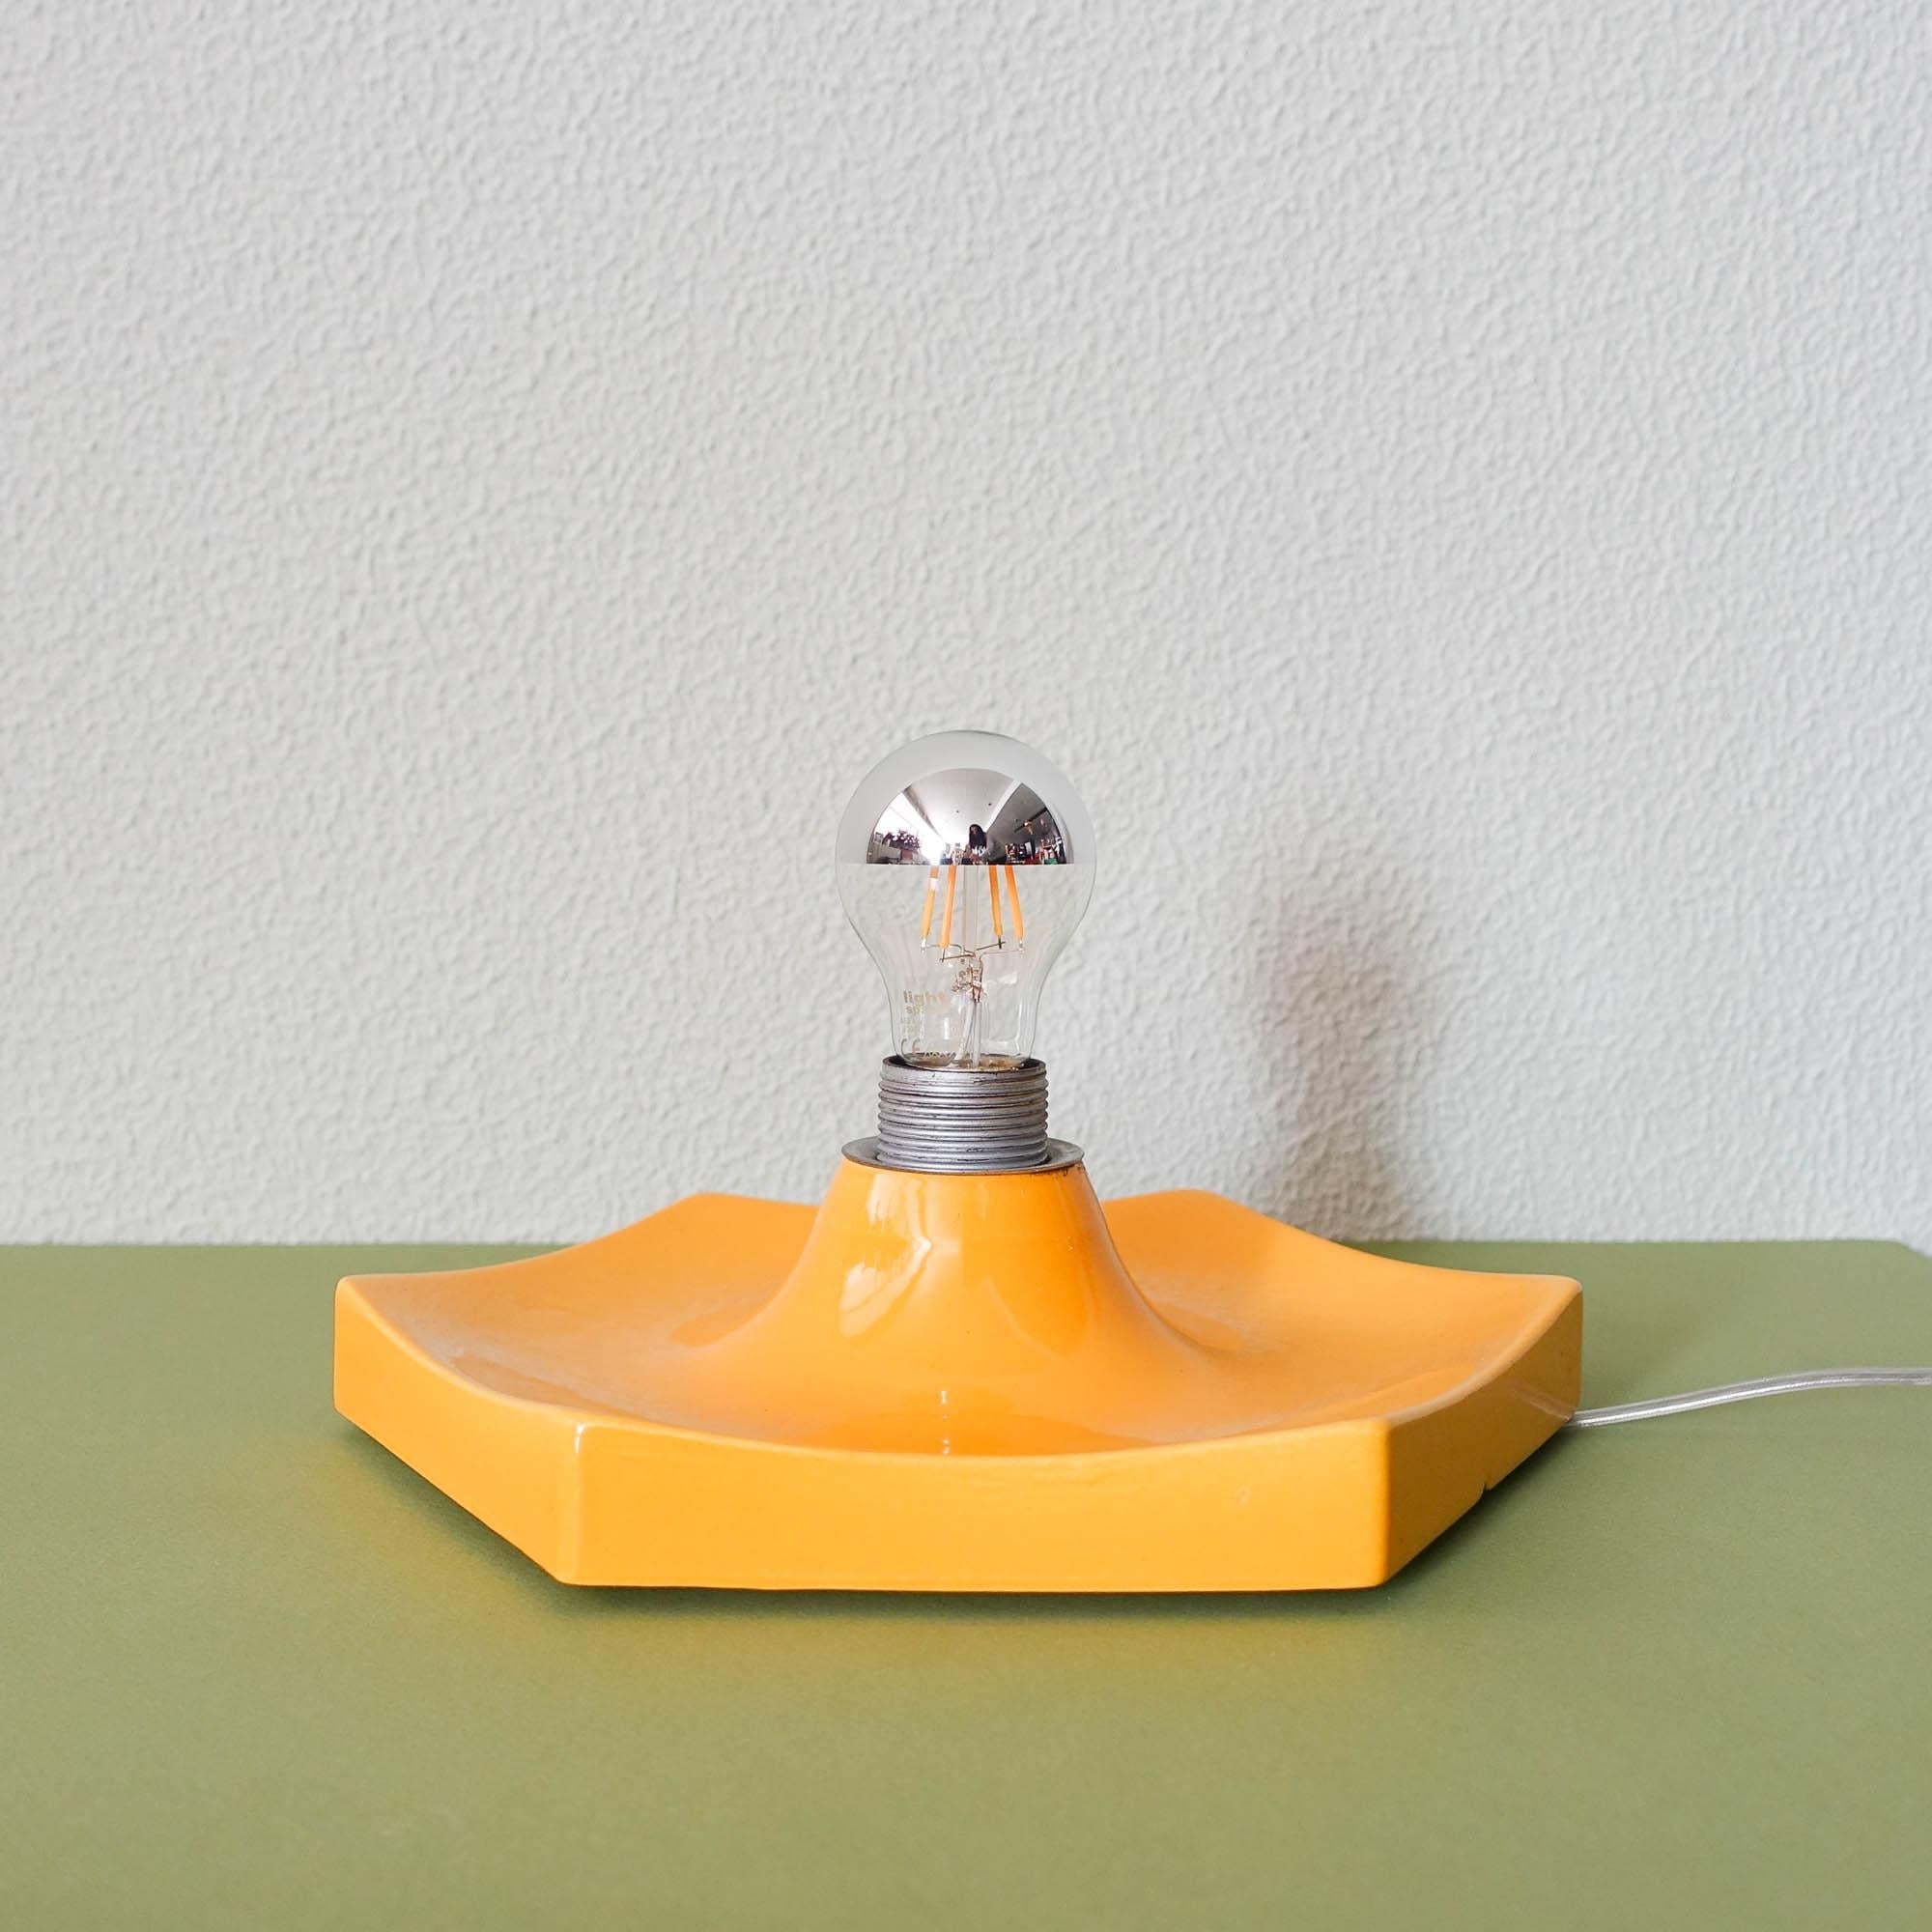 German Wall/ Ceiling Ceramic Lamp, 1970s For Sale 1